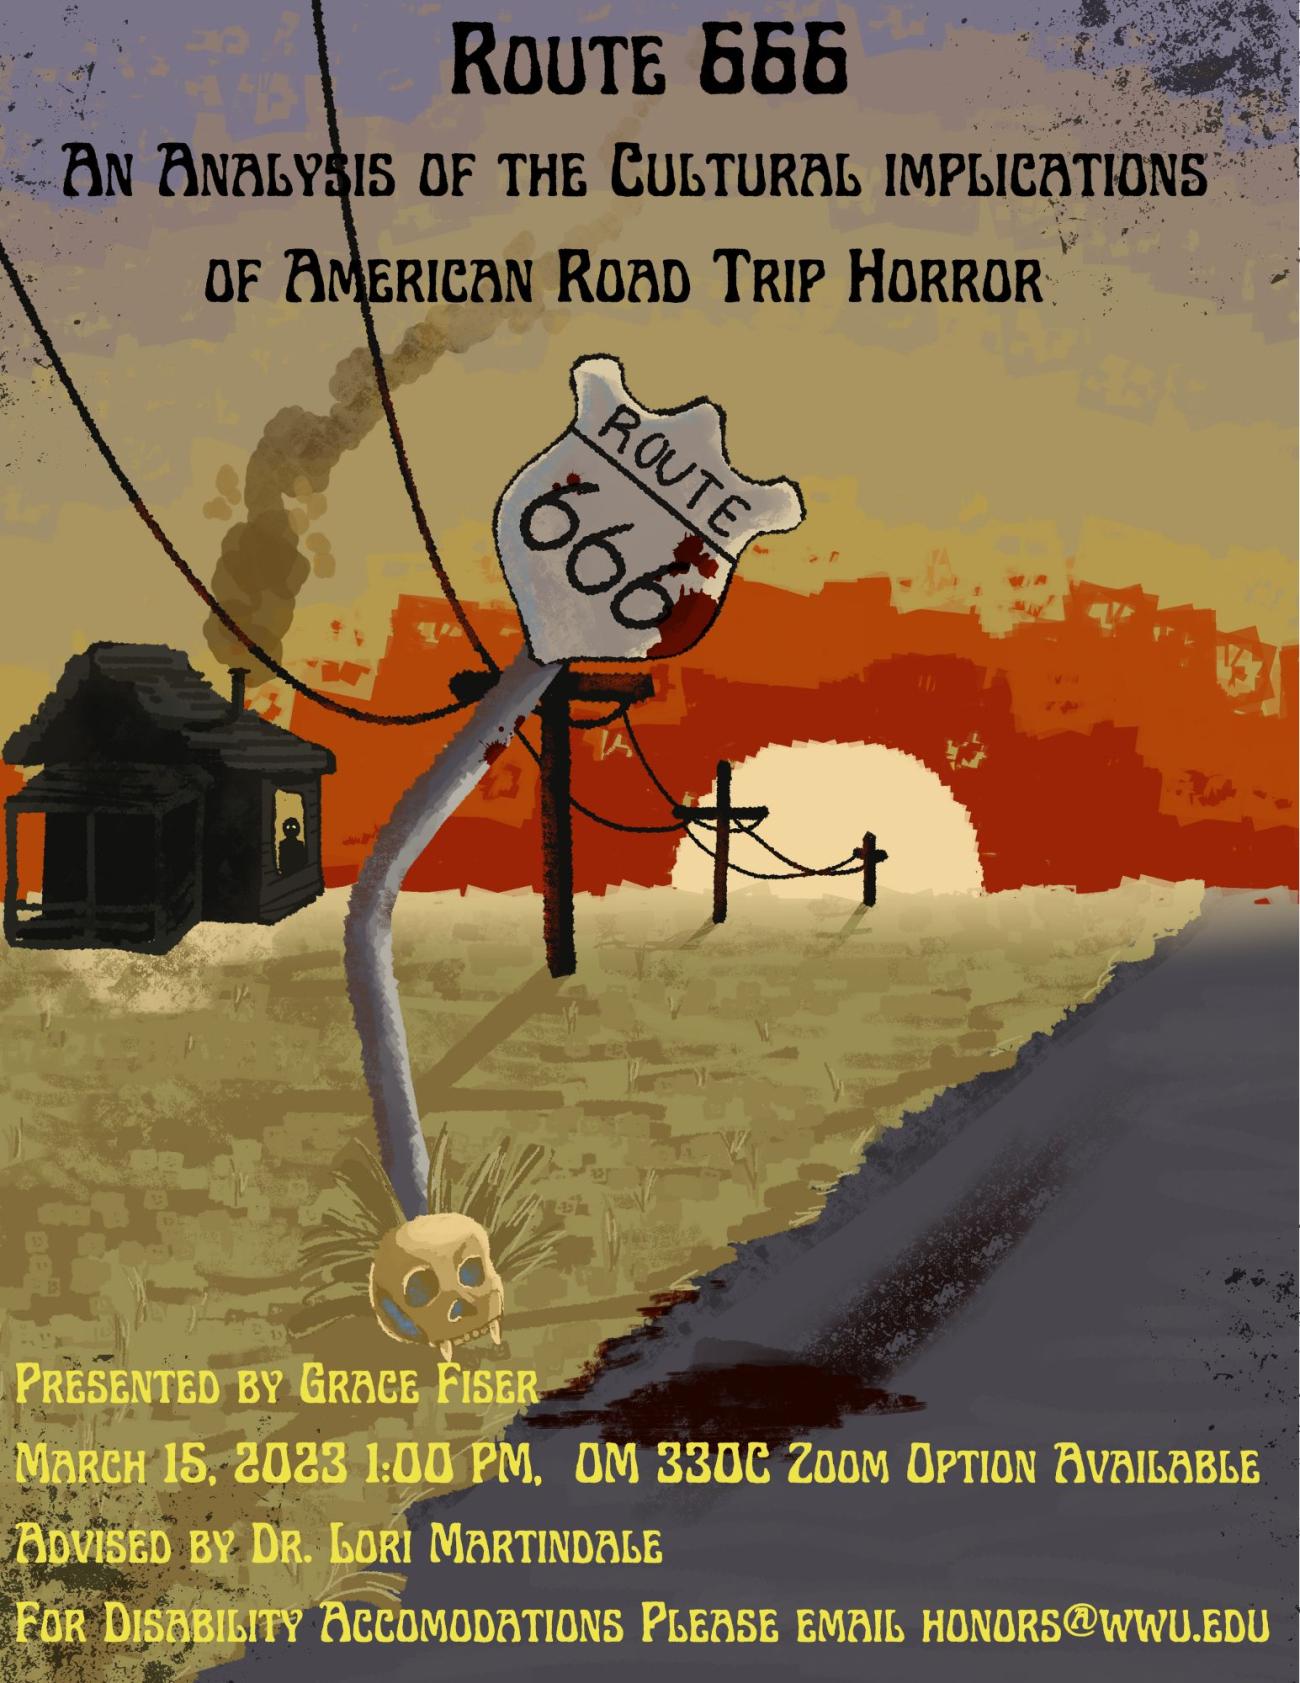 Route 666: An analysis of the cultural implications of American road trip horror